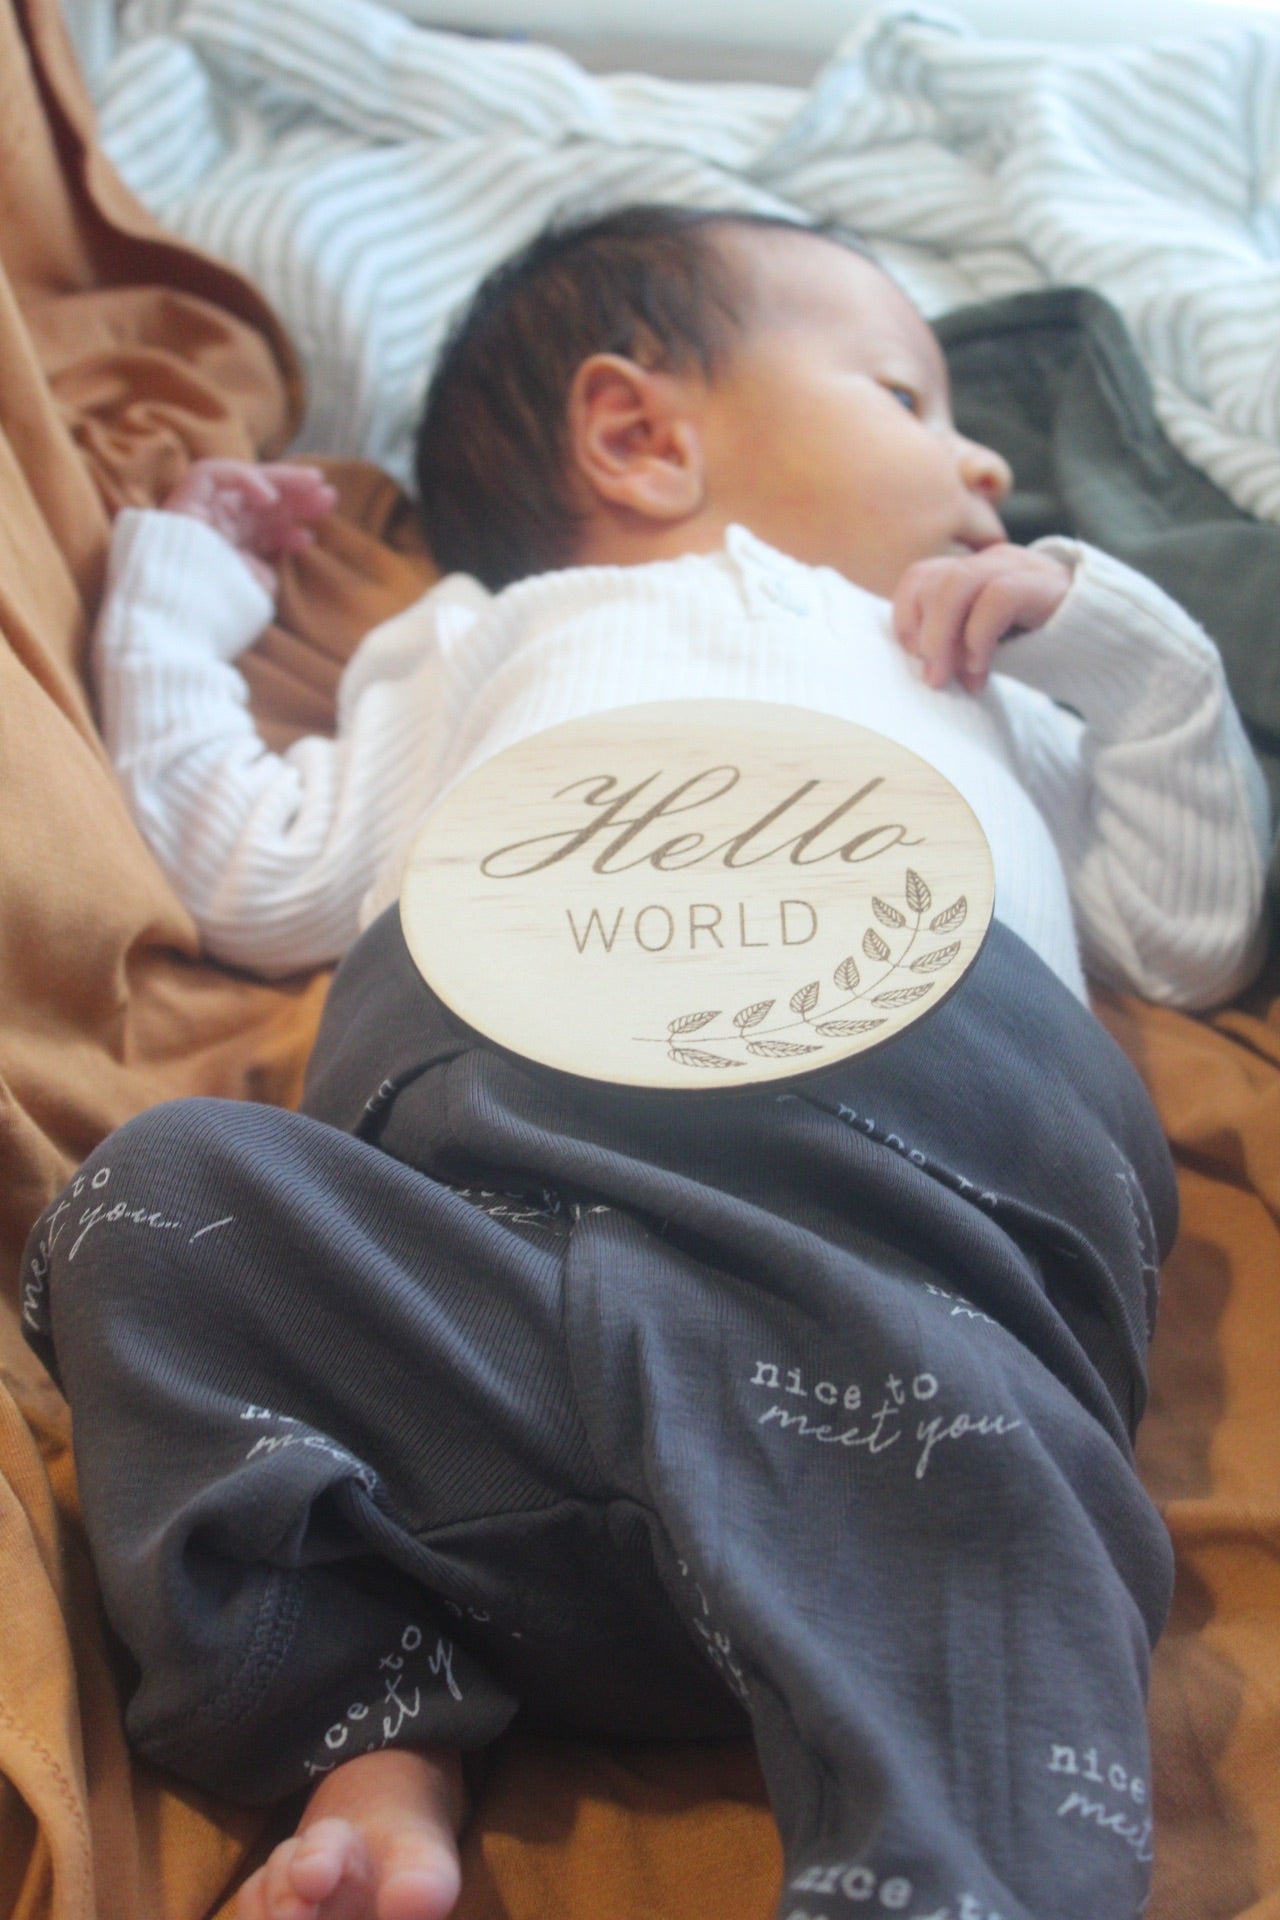 “Hello World, I’m here” raw wooden disc